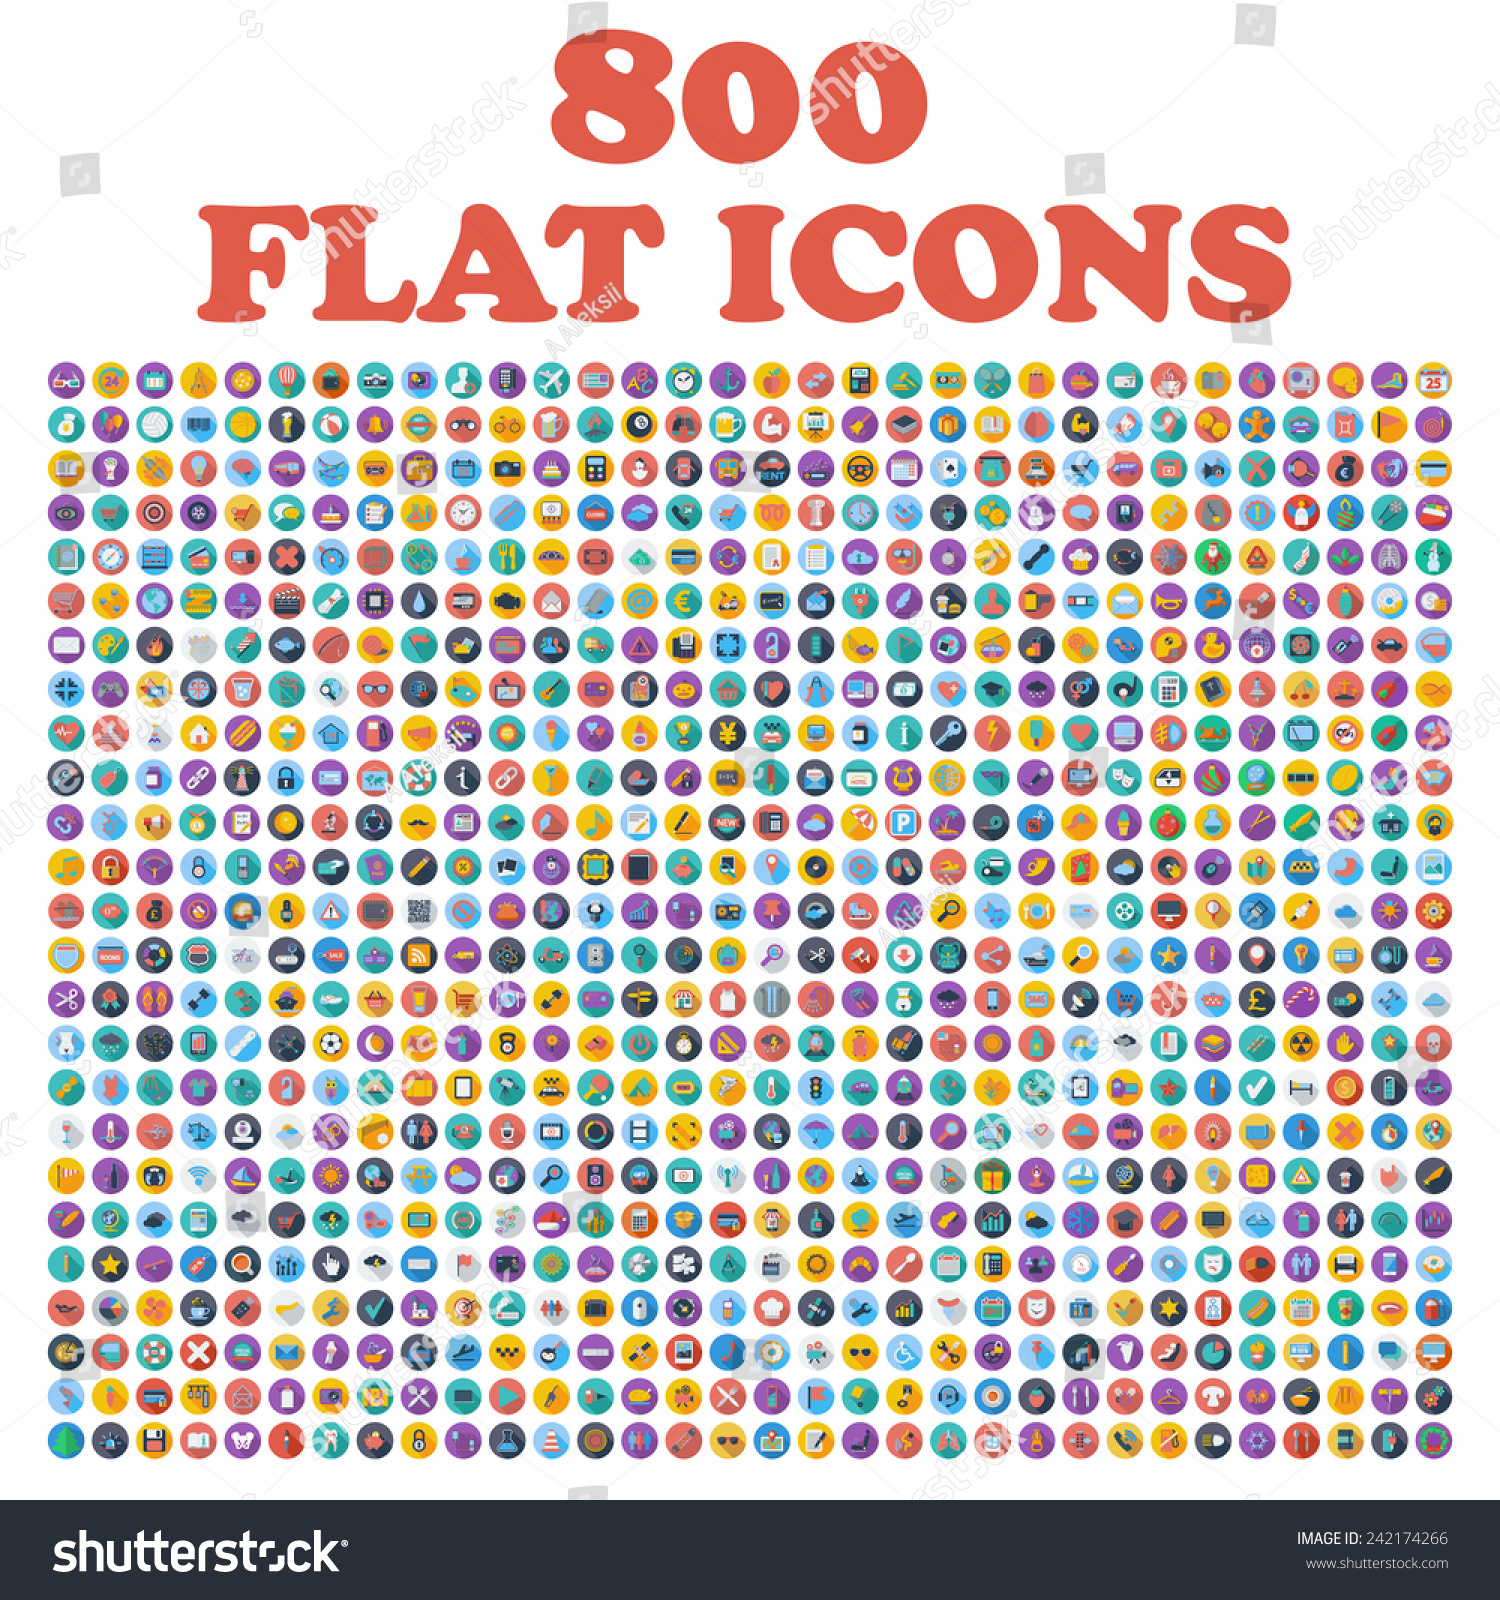 Set of 800 flat icons, for web, internet, mobile apps, interface design: business, finance, shopping, communication, fitness, computer, media, transportation, travel, easter, christmas, summer, device #242174266